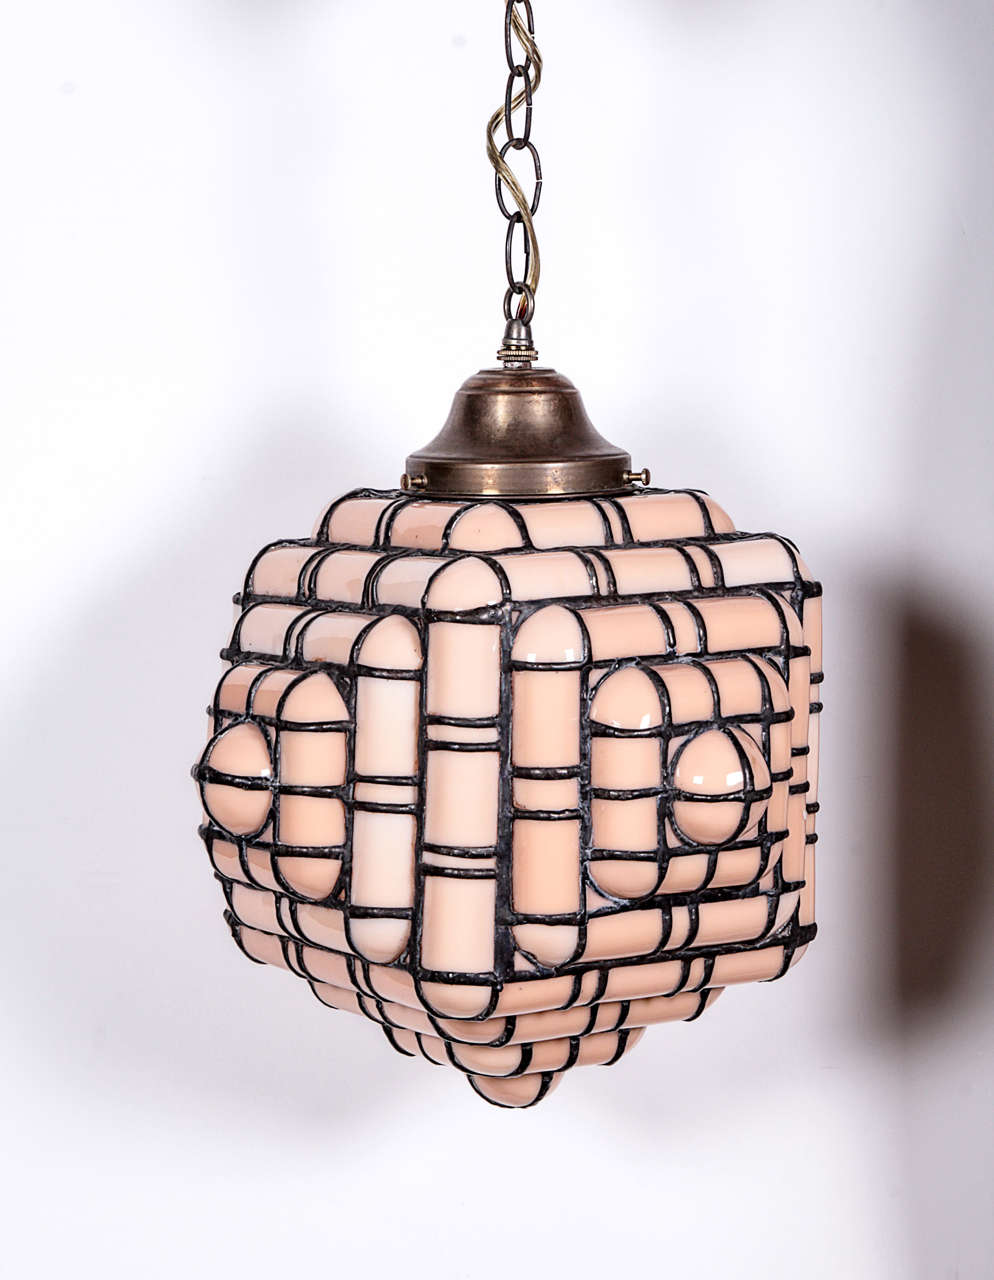 Honeycomb-patterned mosaic glass light fixture by artist Adam Kurtzman. USA, late 20th Century.  Signed.  Two available; priced individually.  Please note that the color of the glass on each light varies slightly.

Item may be viewed at the